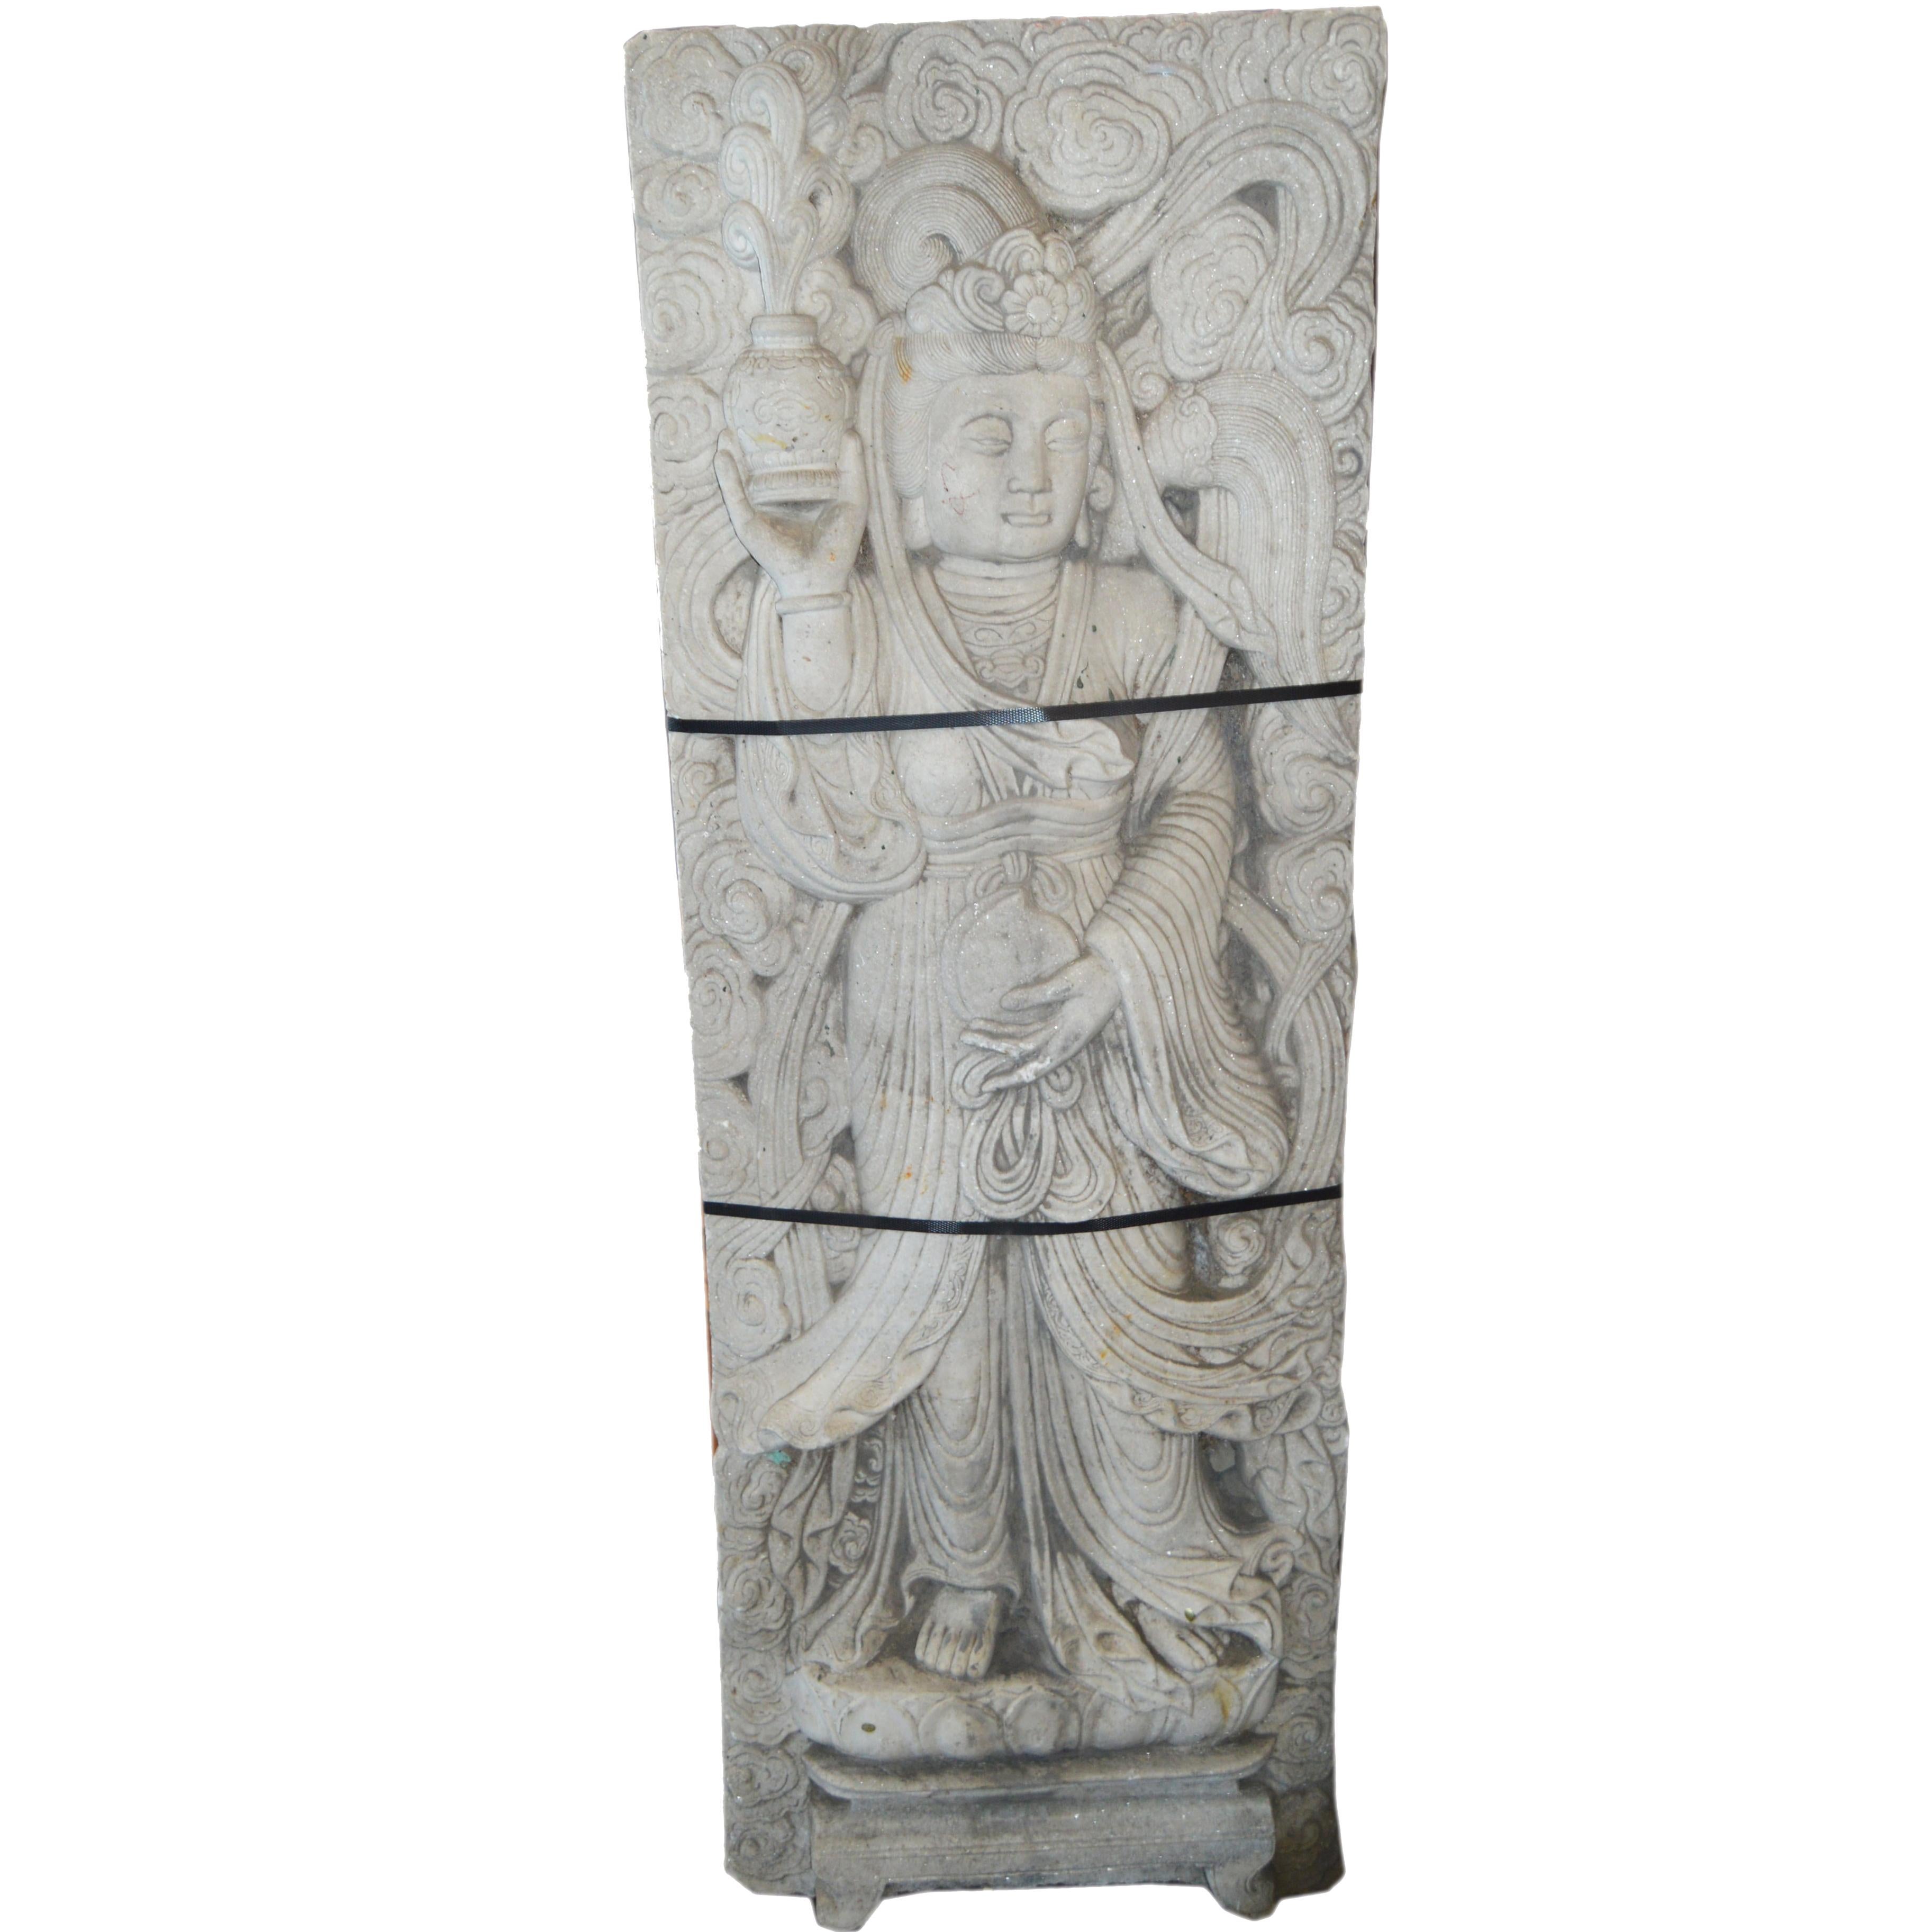 Vintage Chinese Hand-Carved White Stone Temple Sculpture of a Bodhisattva